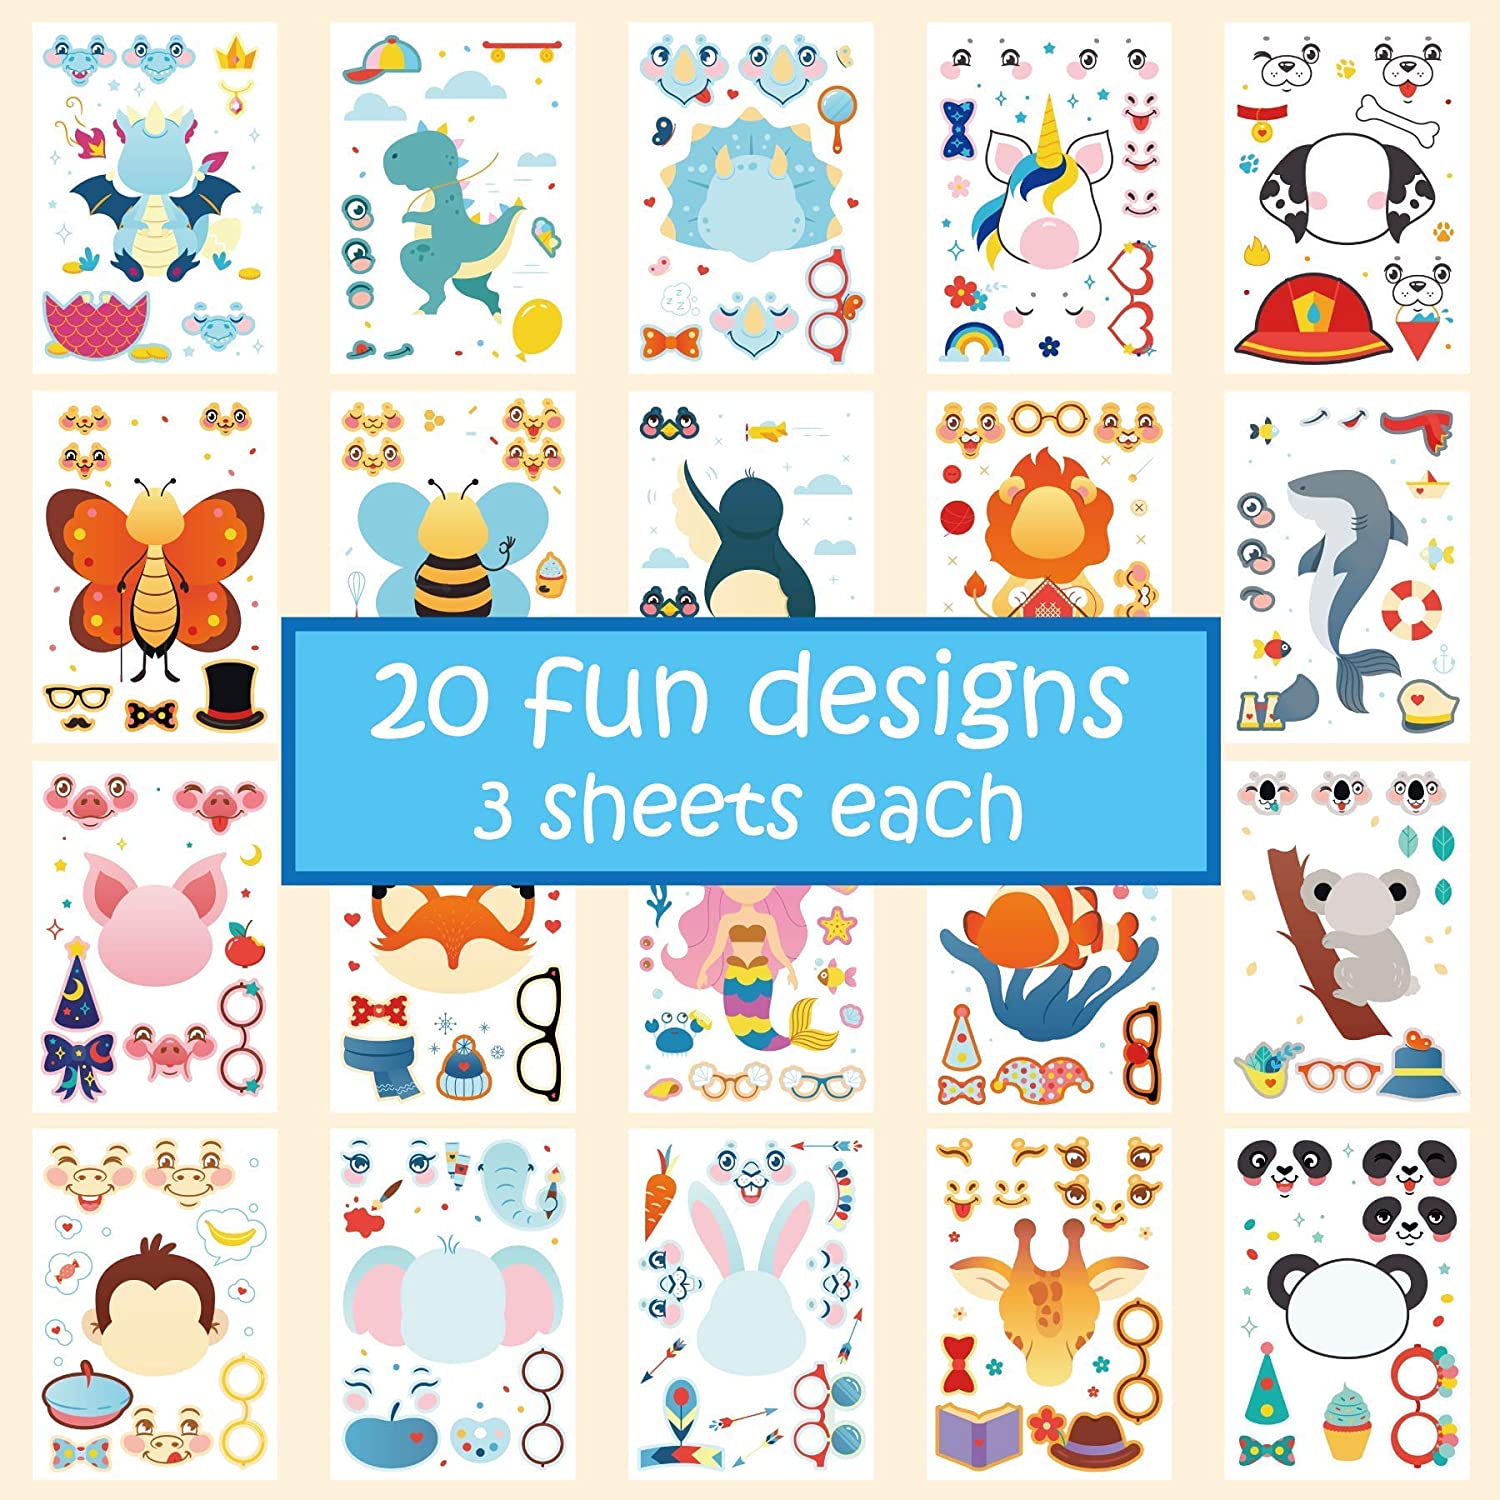 Make Your Own Stickers for Kids, Make-a-Face Stickers, 100 Pack 20 Animals. Zoo Animals, Sea Creature, Dinosaur and More , Gift of Festival, Reward, Art Craft, Party Favors, School